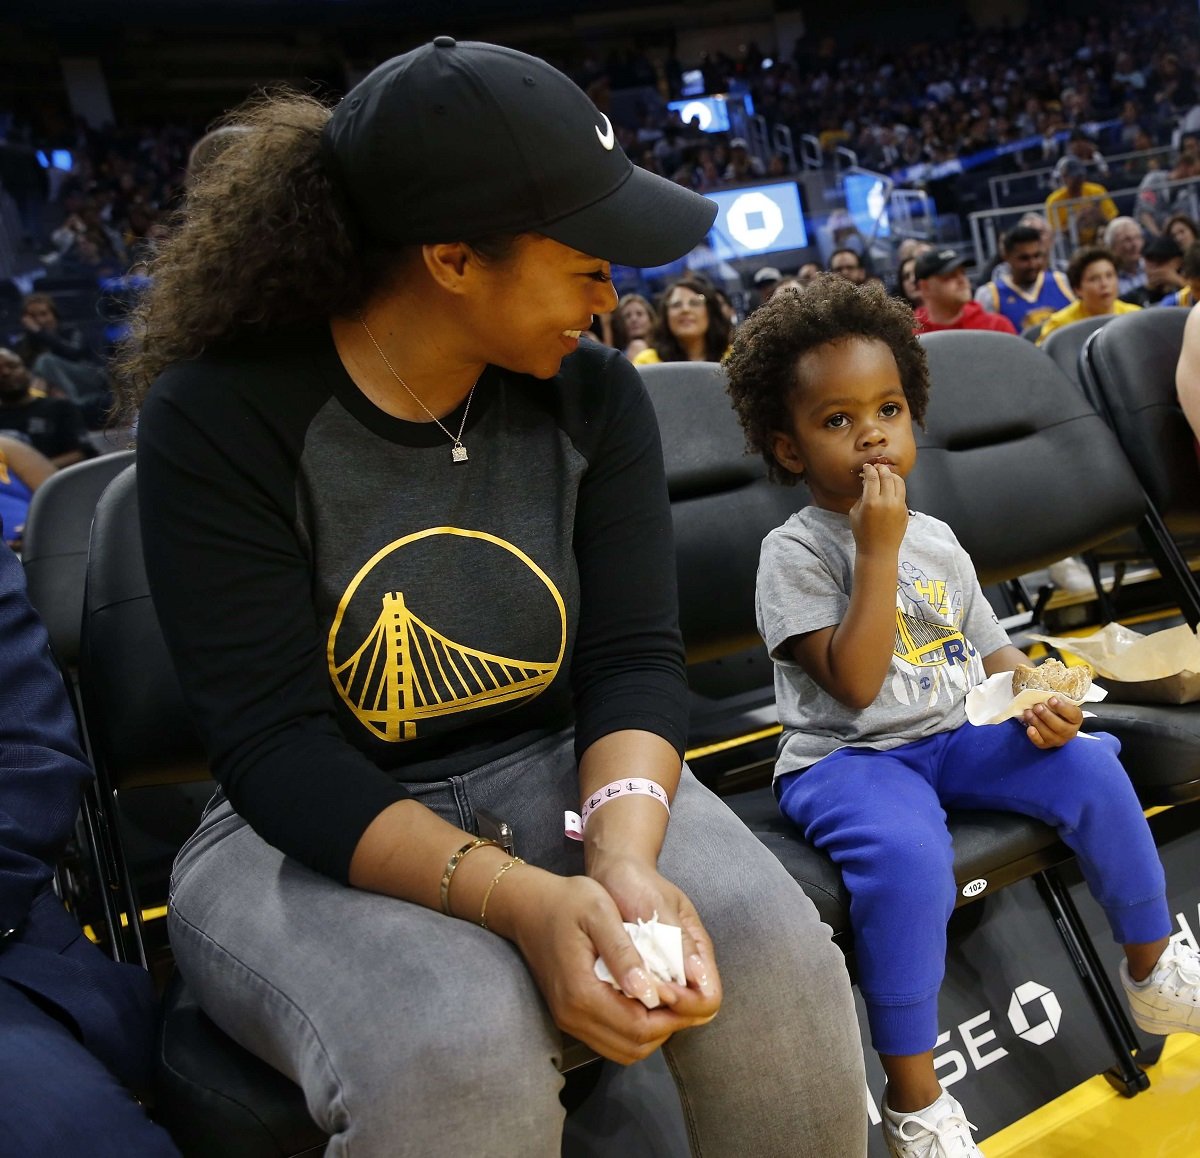 Hazel Renee sitting courtside at a Golden State Warriors game with her daughter Olive